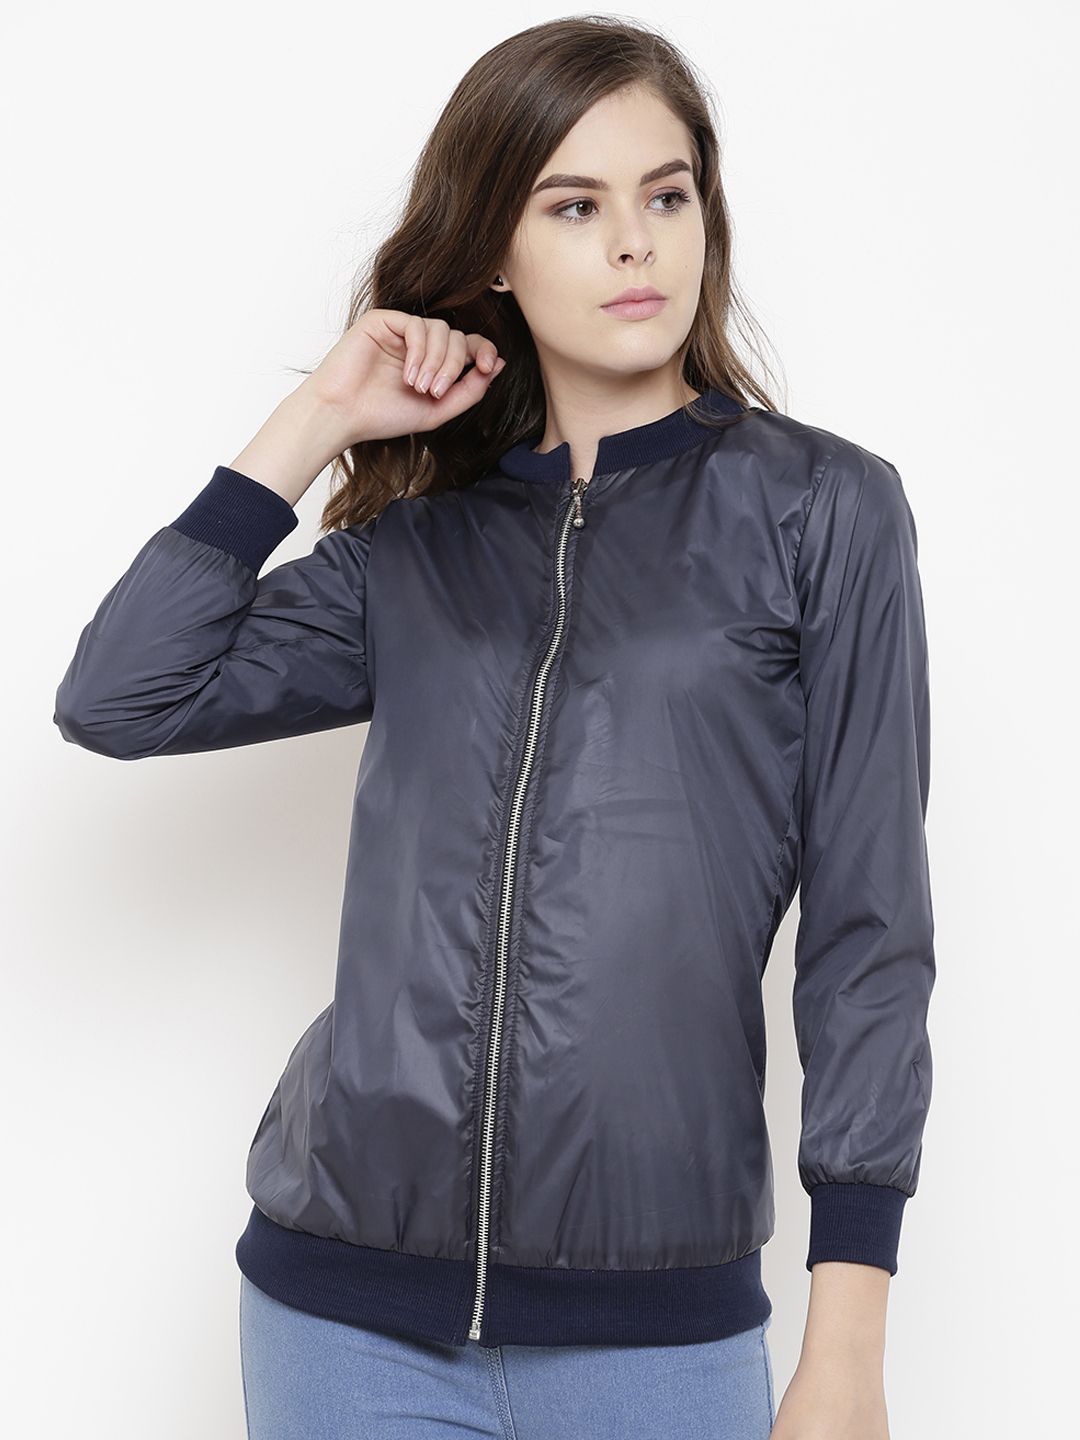 Belle Fille Women Navy Blue Solid Lightweight Bomber Jacket Price in India